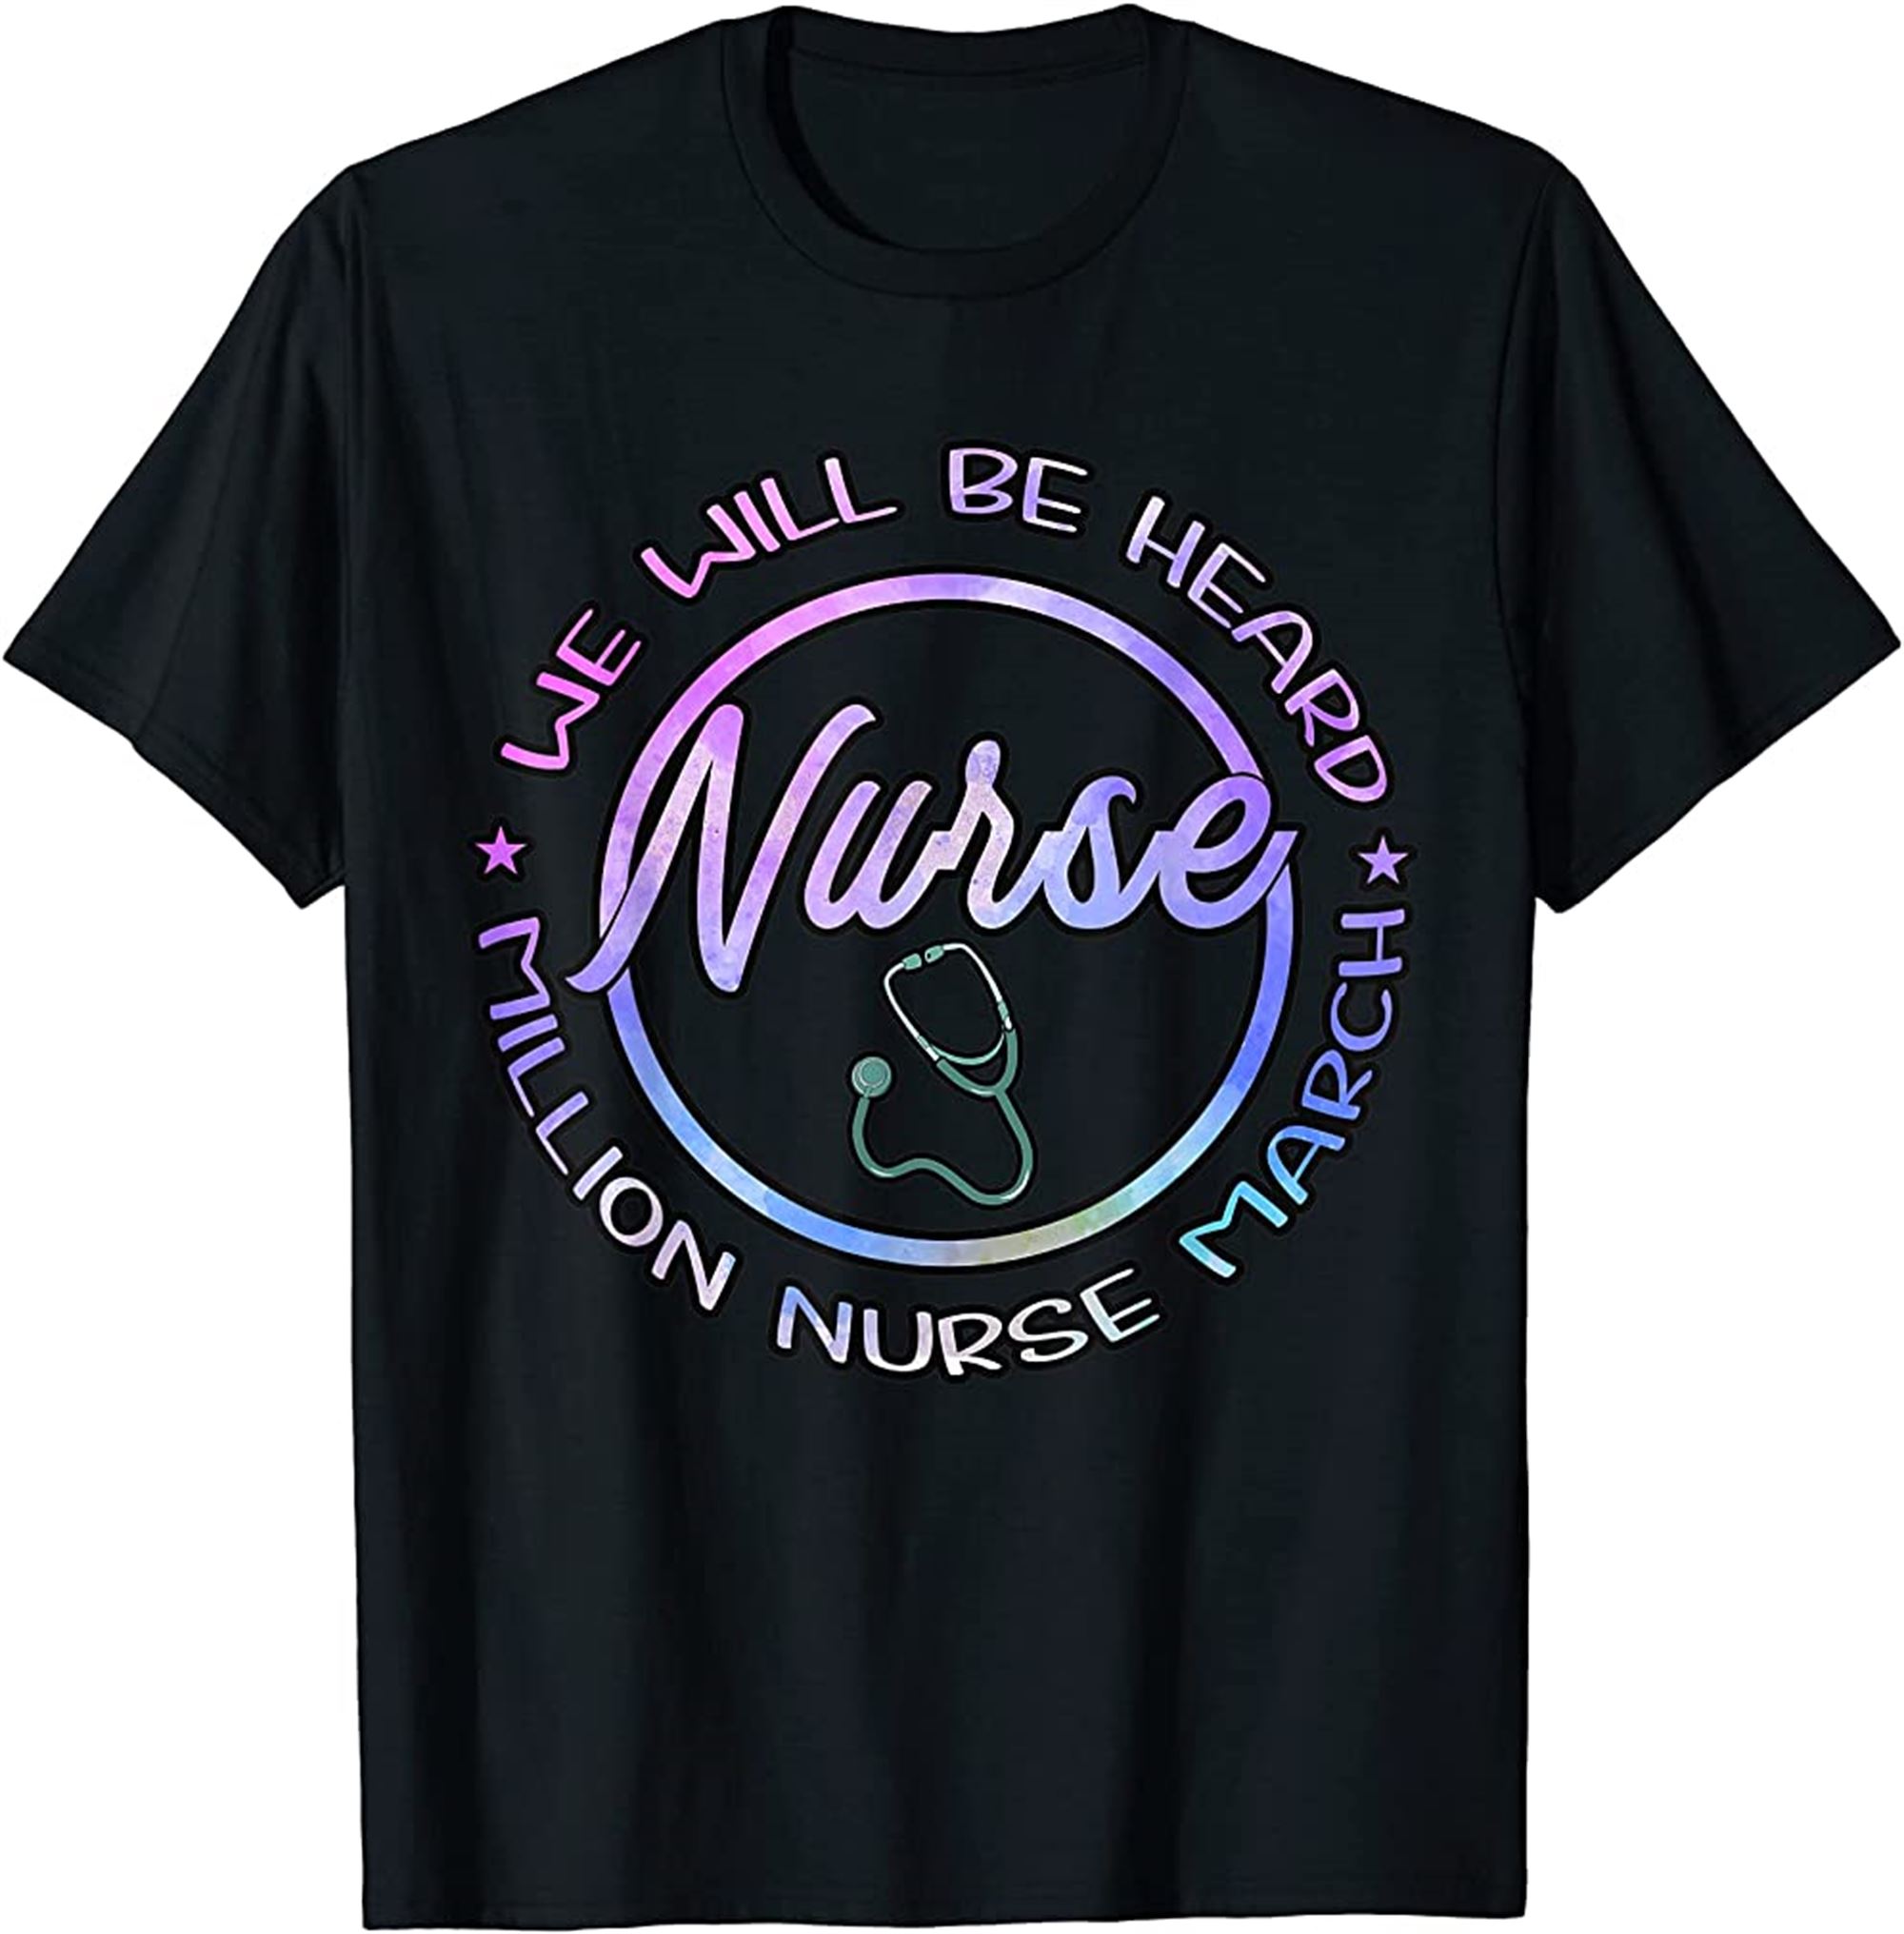 We Will Be Heard Million Nurse March May 12 2022 T-shirt Full Size Up To 5xl